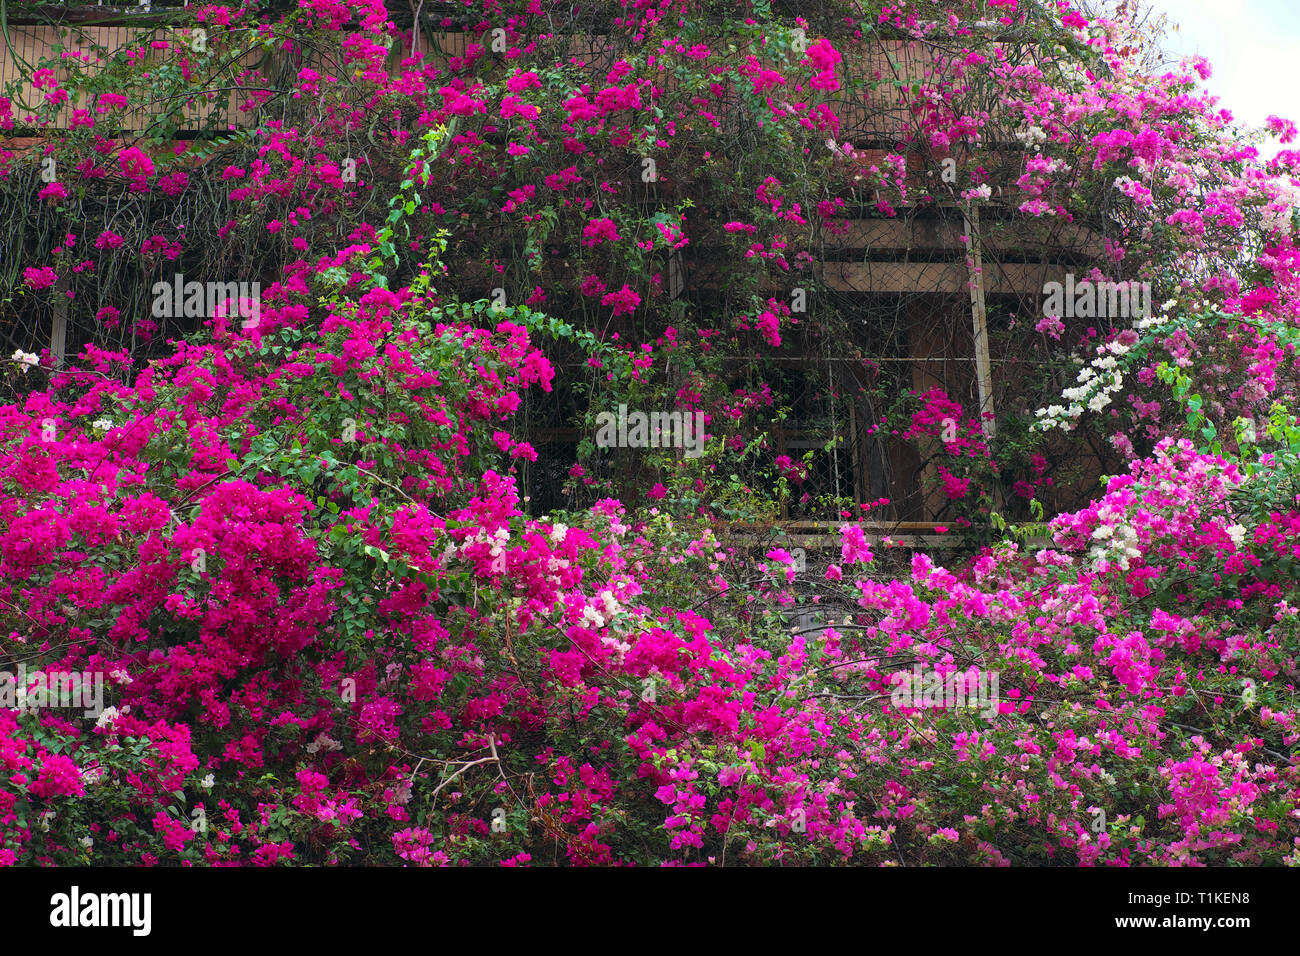 Amazing house at Ho Chi Minh city, Vietnam with pink bougainvillea flower  cover facade of building, flower trellis decoration for front of house  Stock Photo - Alamy